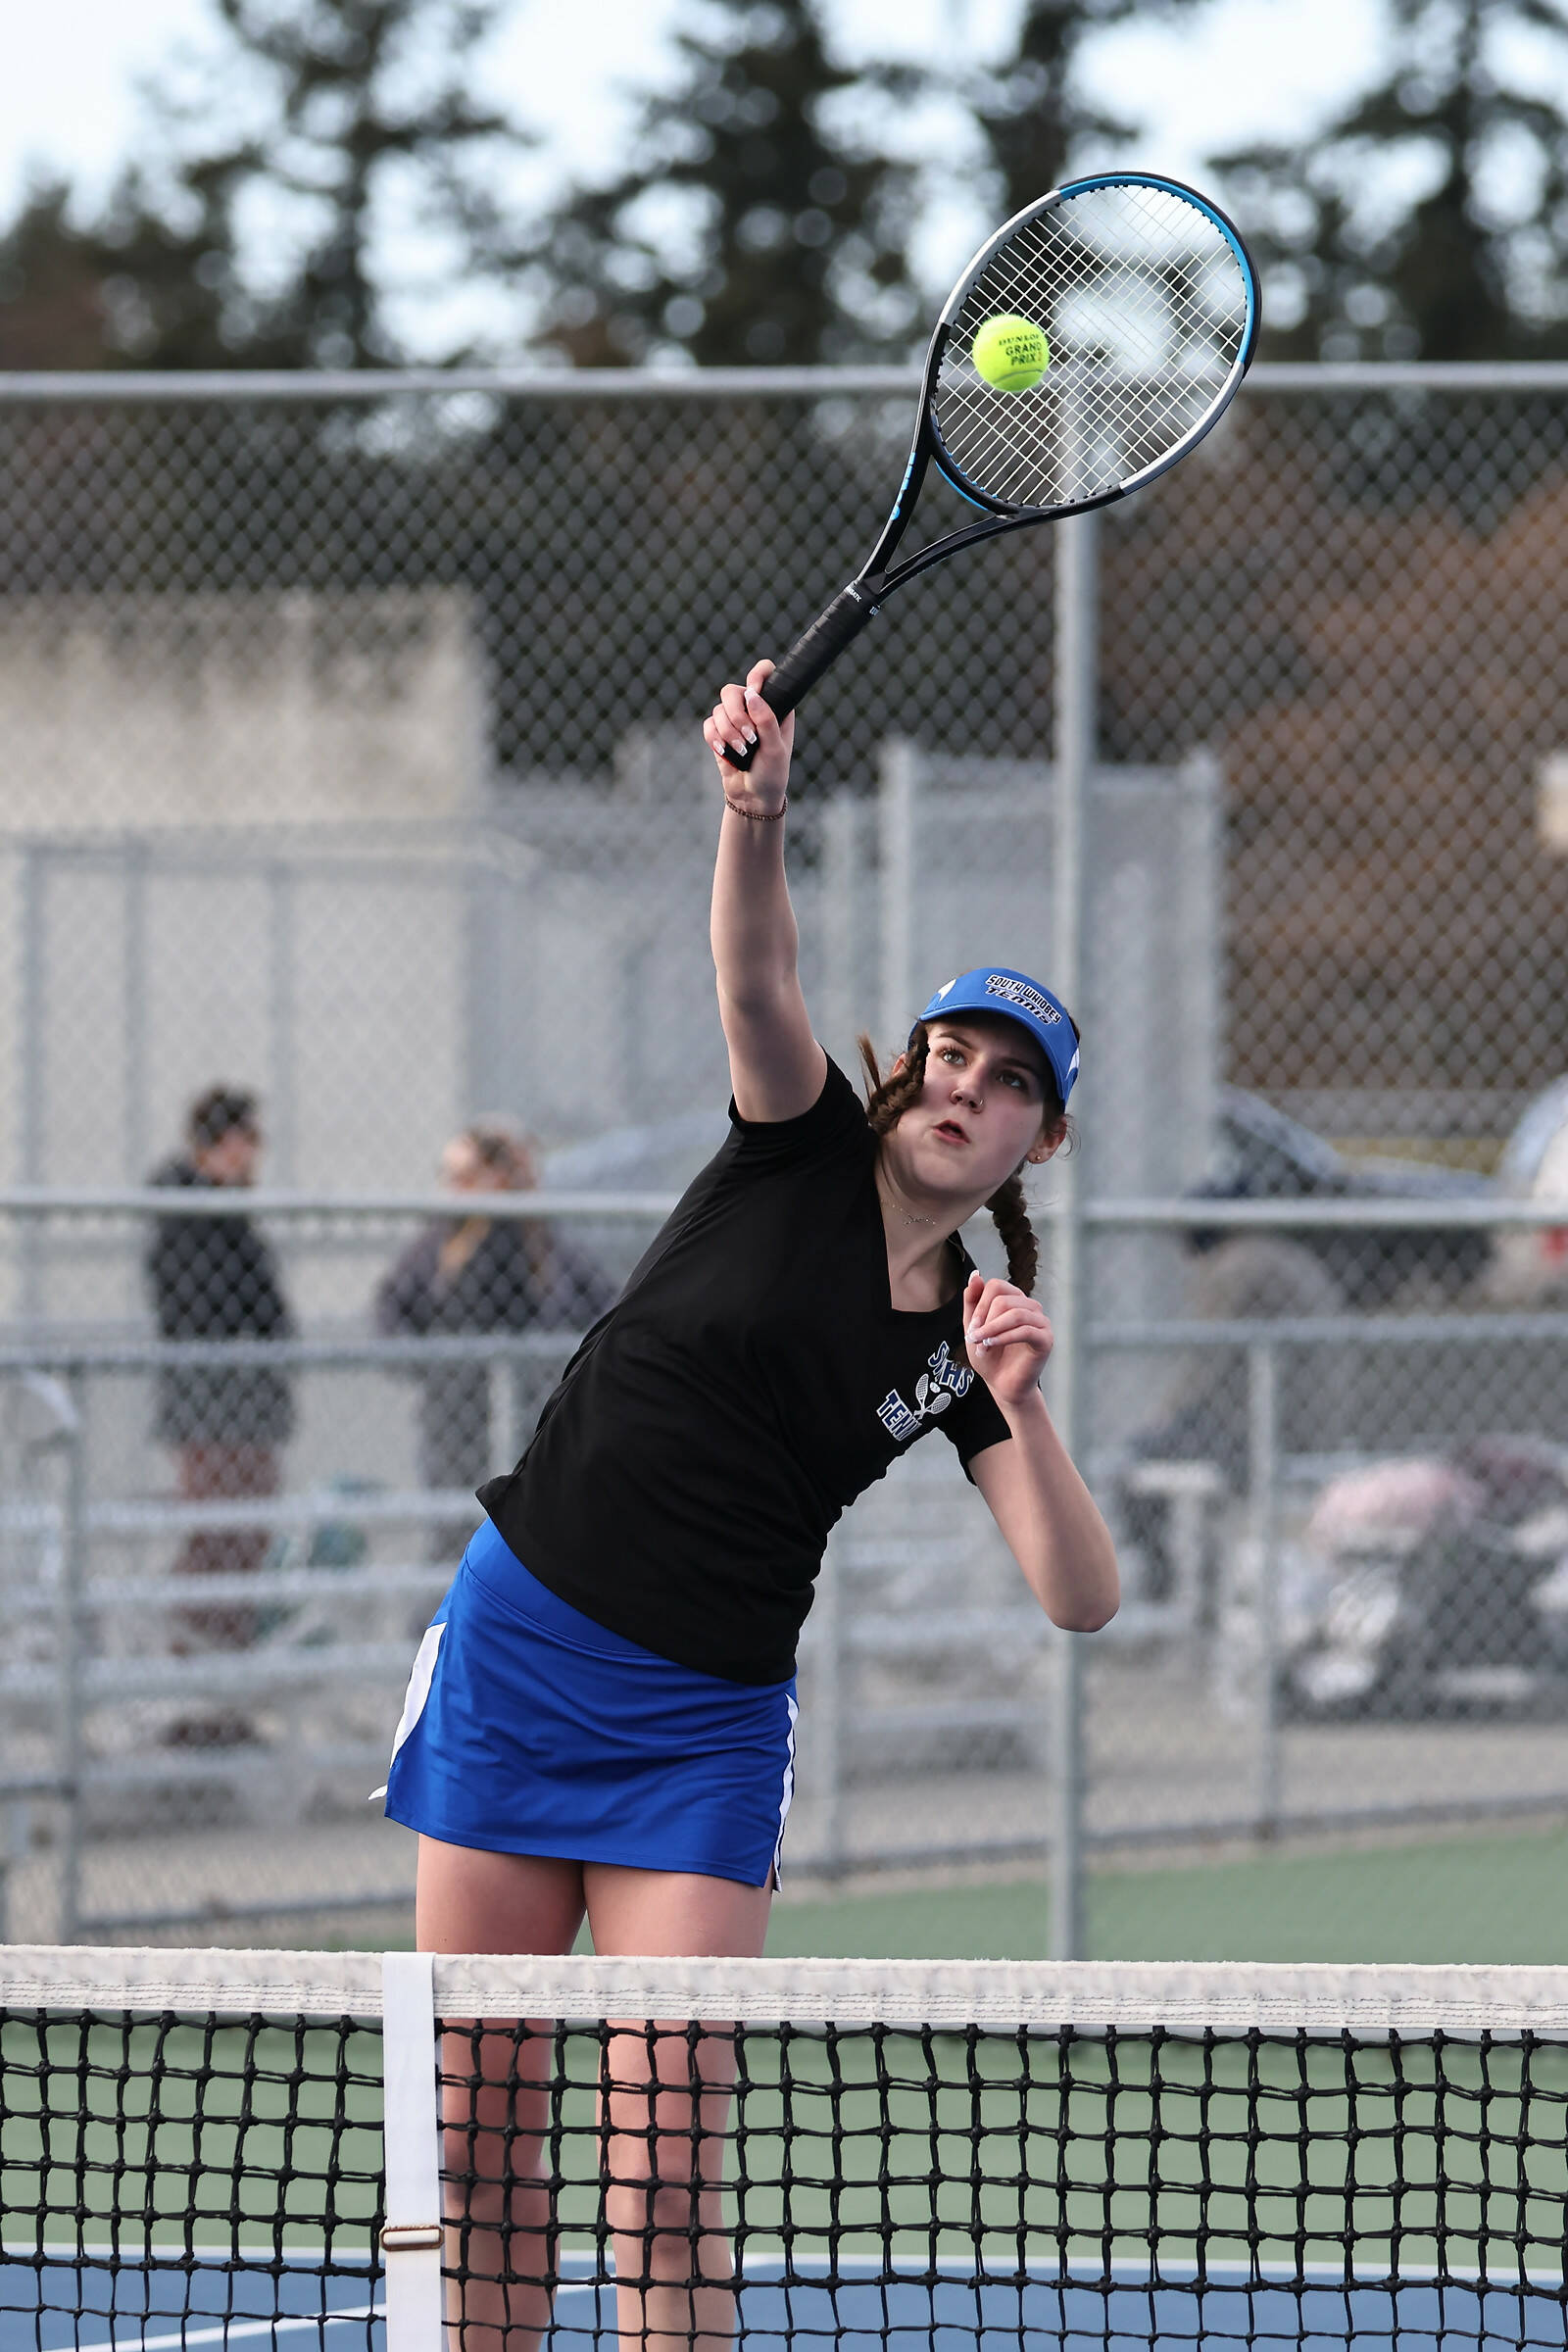 Photo by John Fisken
South Whidbey senior Maia Richards, No. 2 singles in varsity, returns the ball during the match against Oak Harbor.